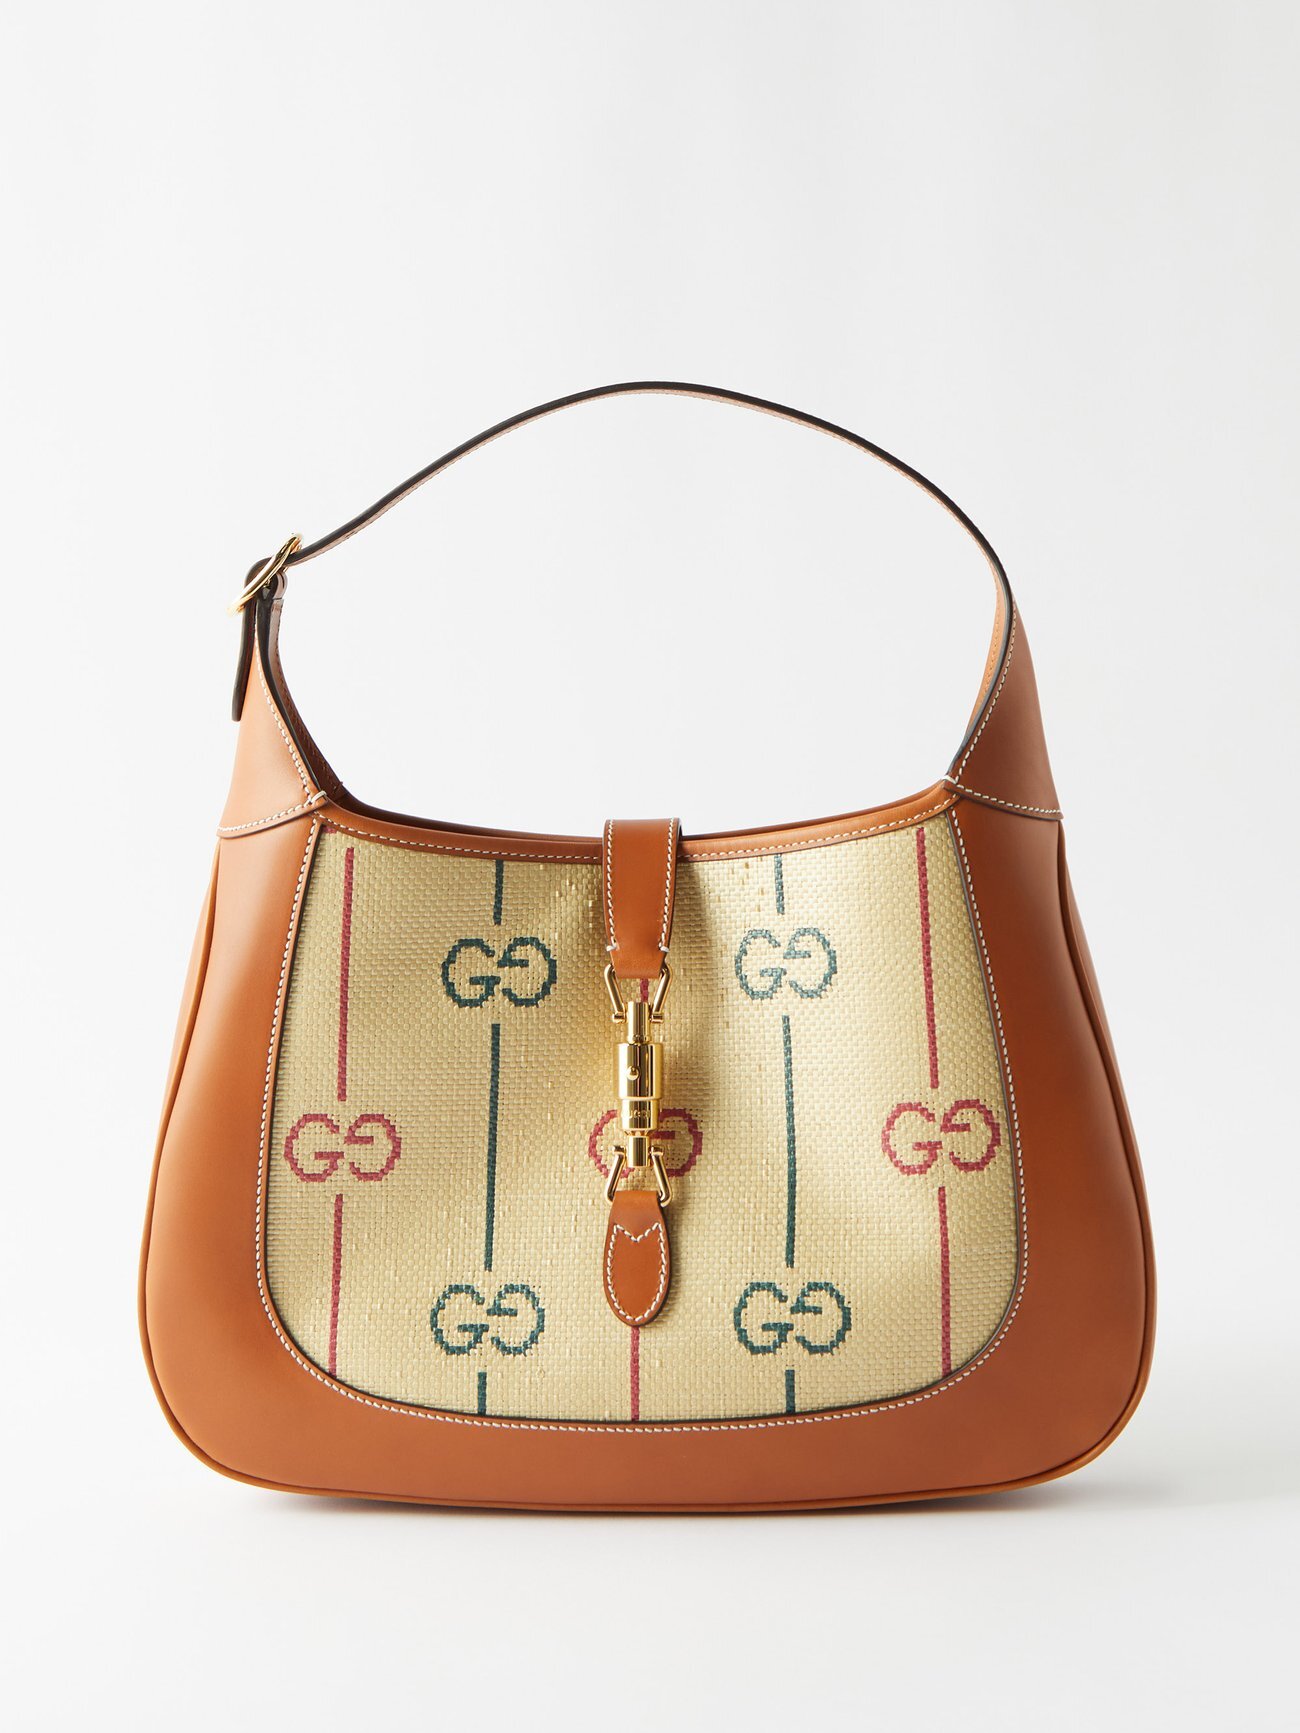 Gucci - Jackie 1961 Medium Gg Supreme And Leather Bag - Womens - Beige Multi